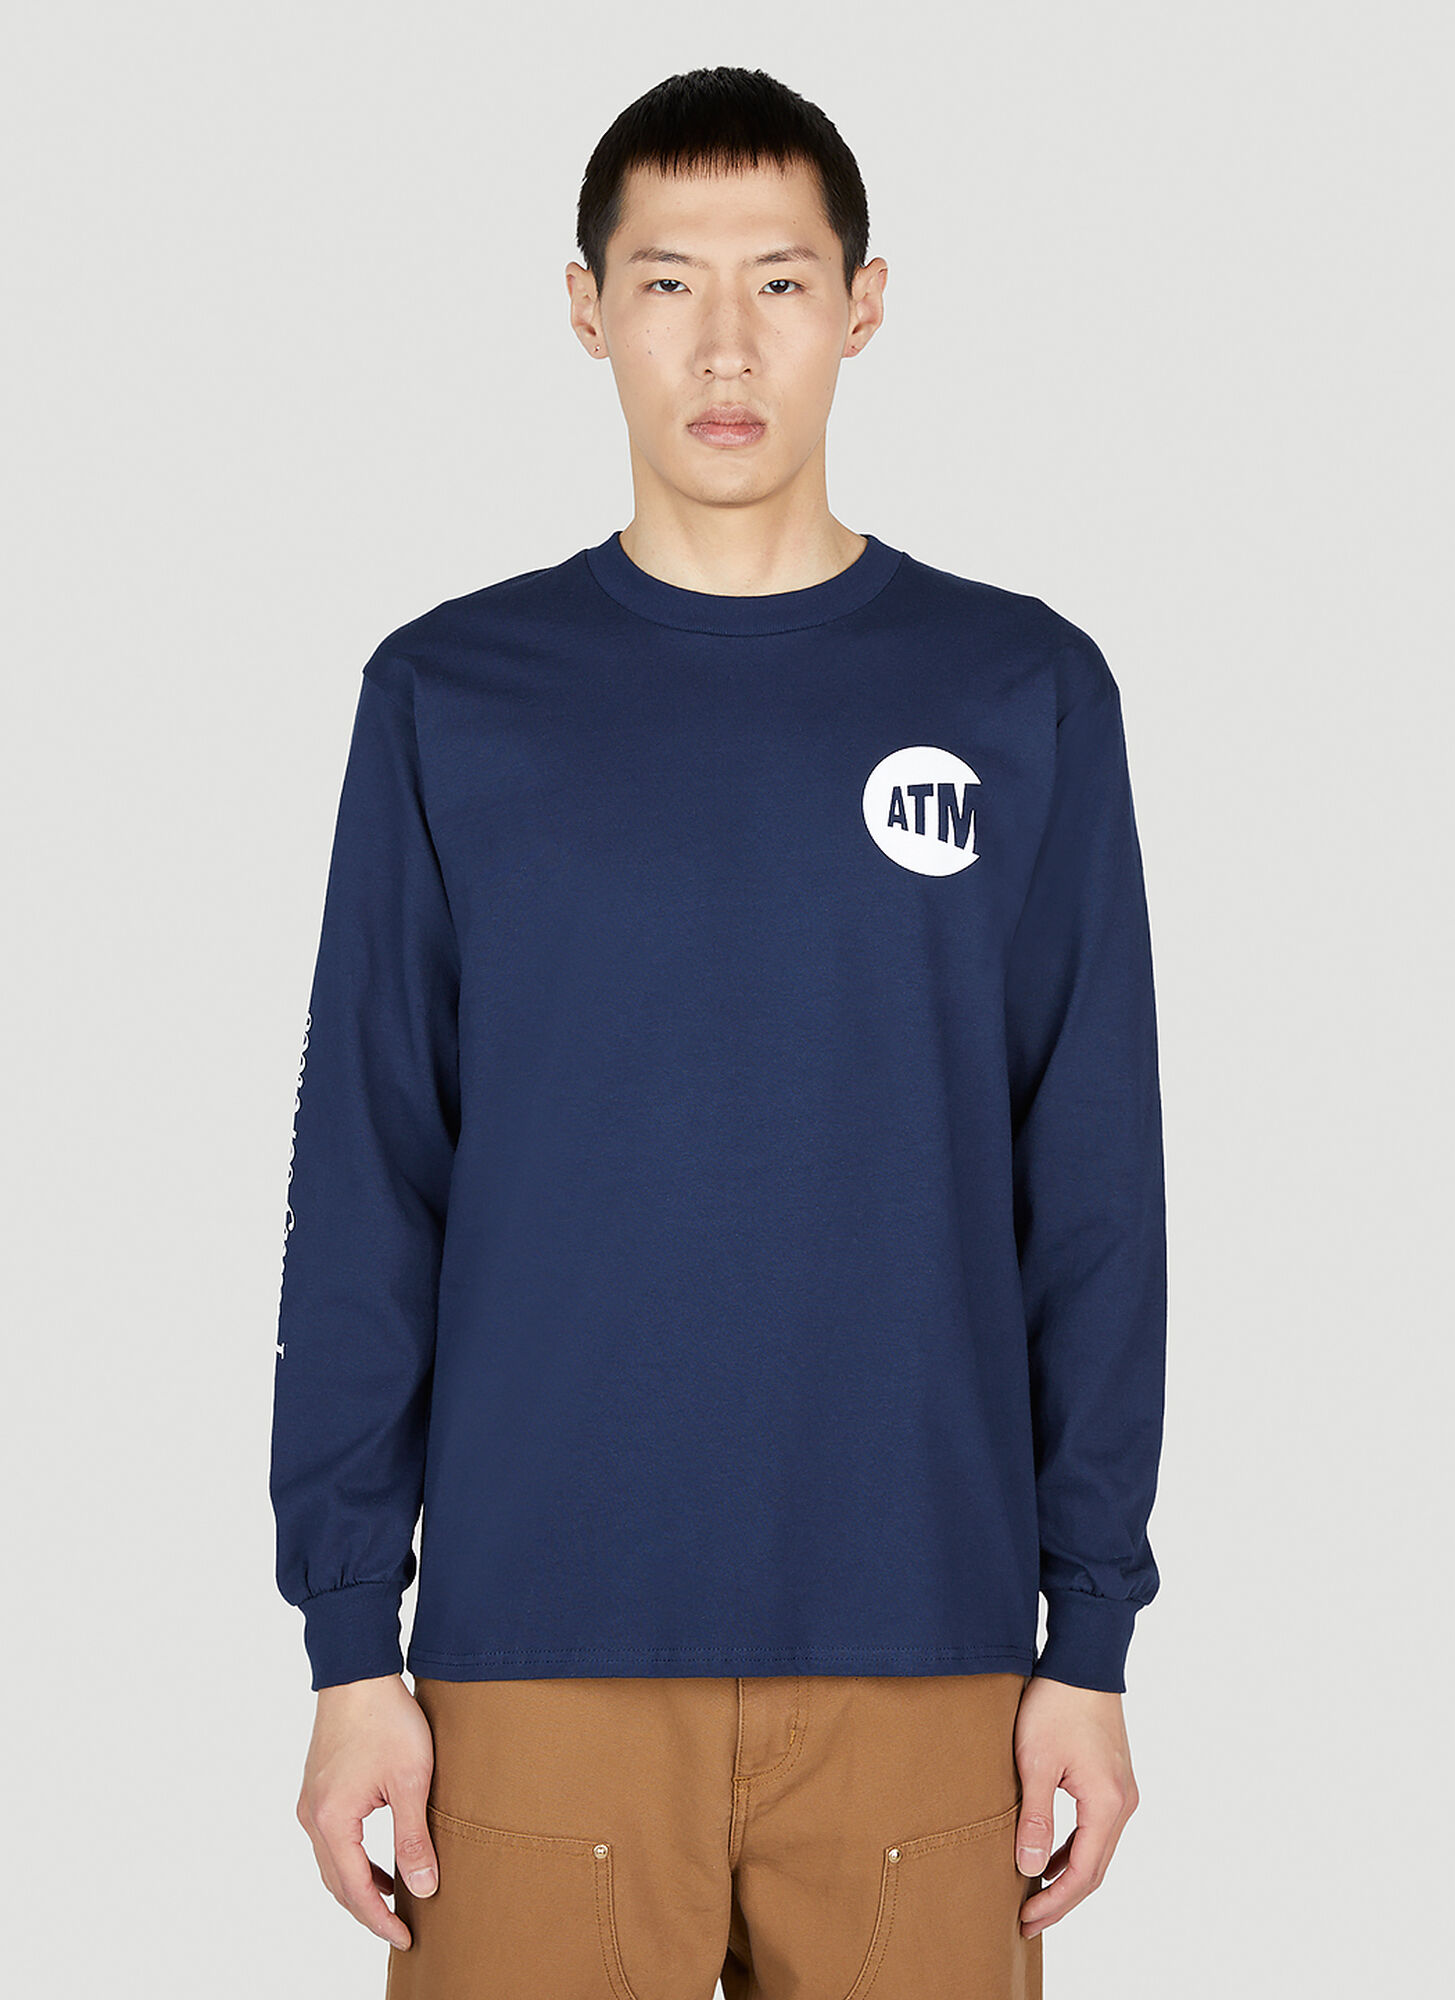 Dtf.nyc Atm Cash Only Long-sleeved T-shirt In Dark Blue